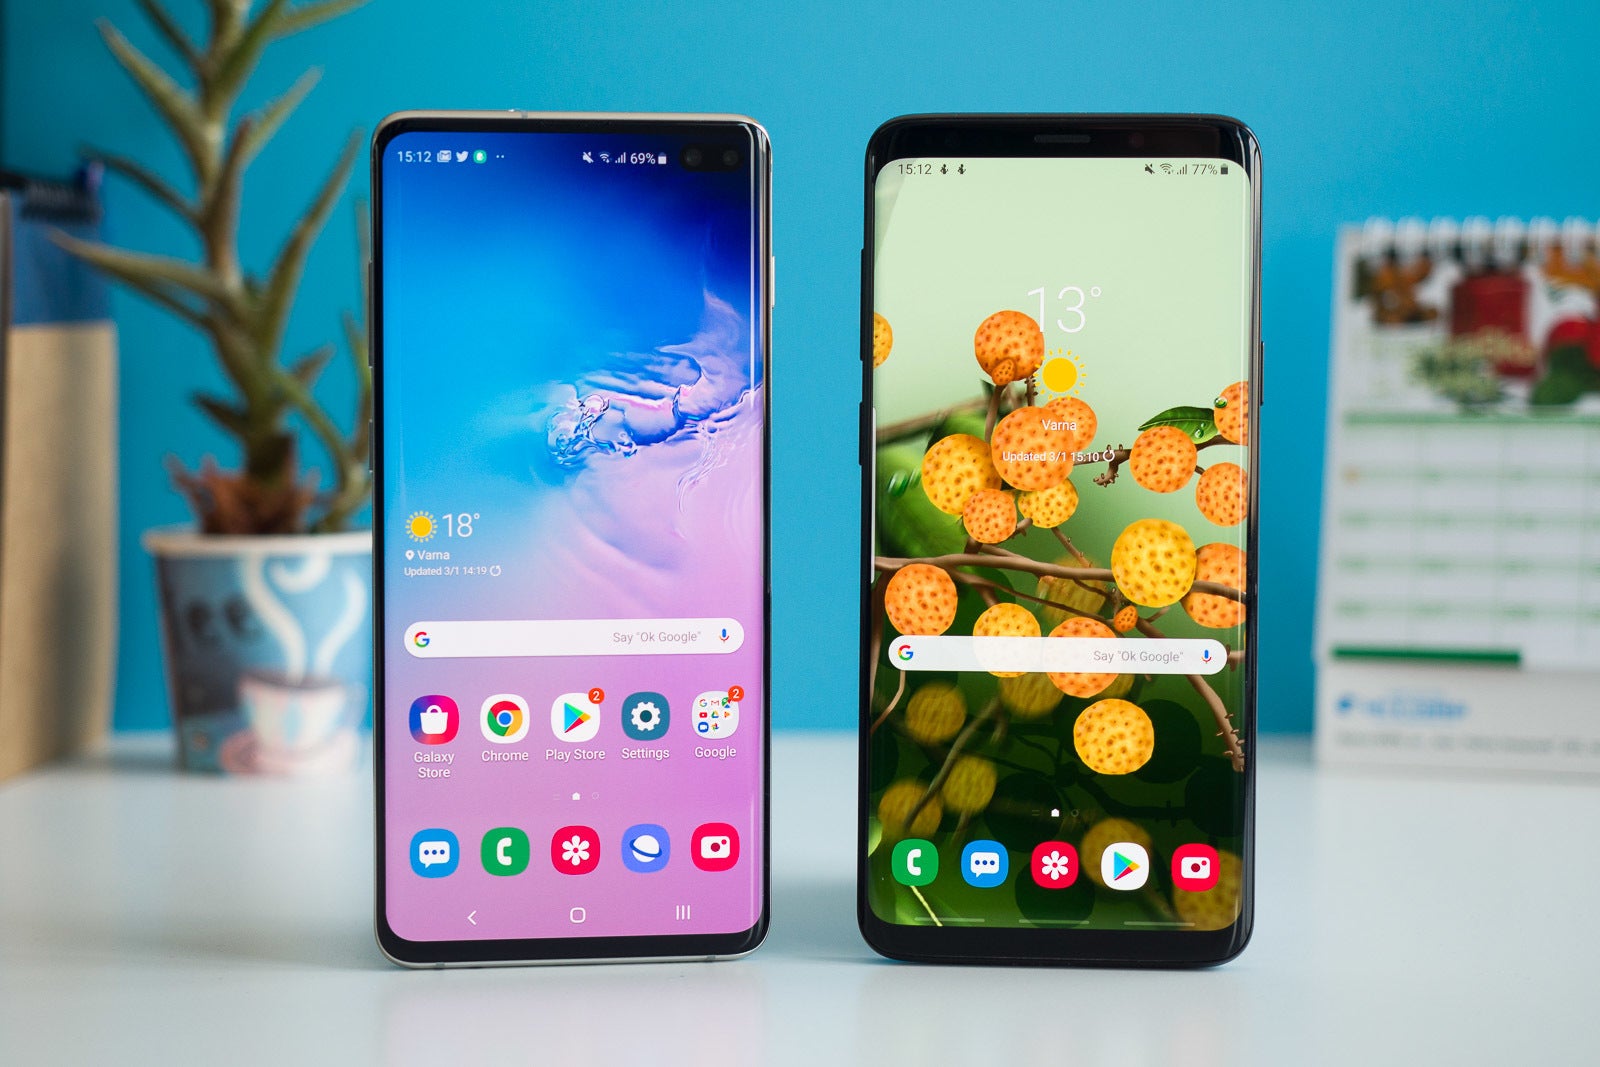 The jump between the Galaxy S9+ and the S10+ is as big as it gets these days - How can manufacturers counter the increasing smartphone upgrade cycle?